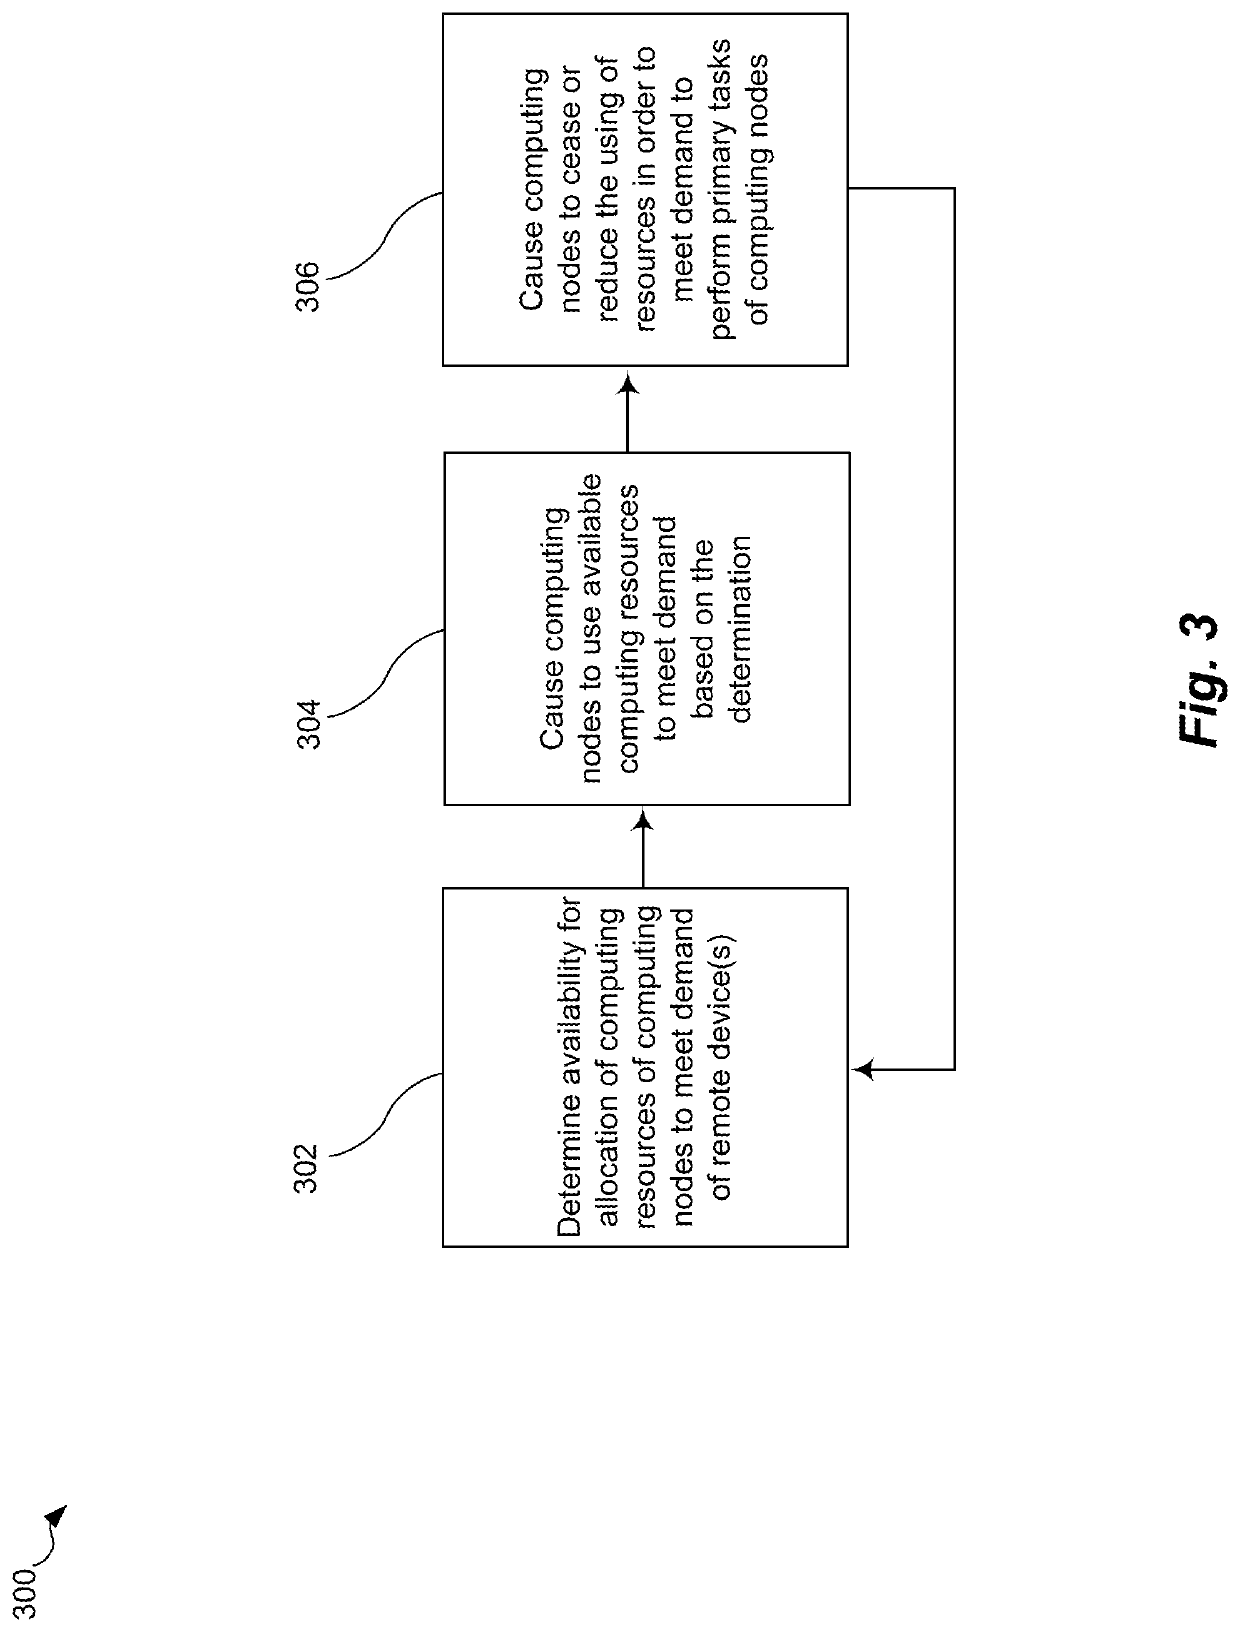 Systems and methods for utilizing distributed computing and storage resources